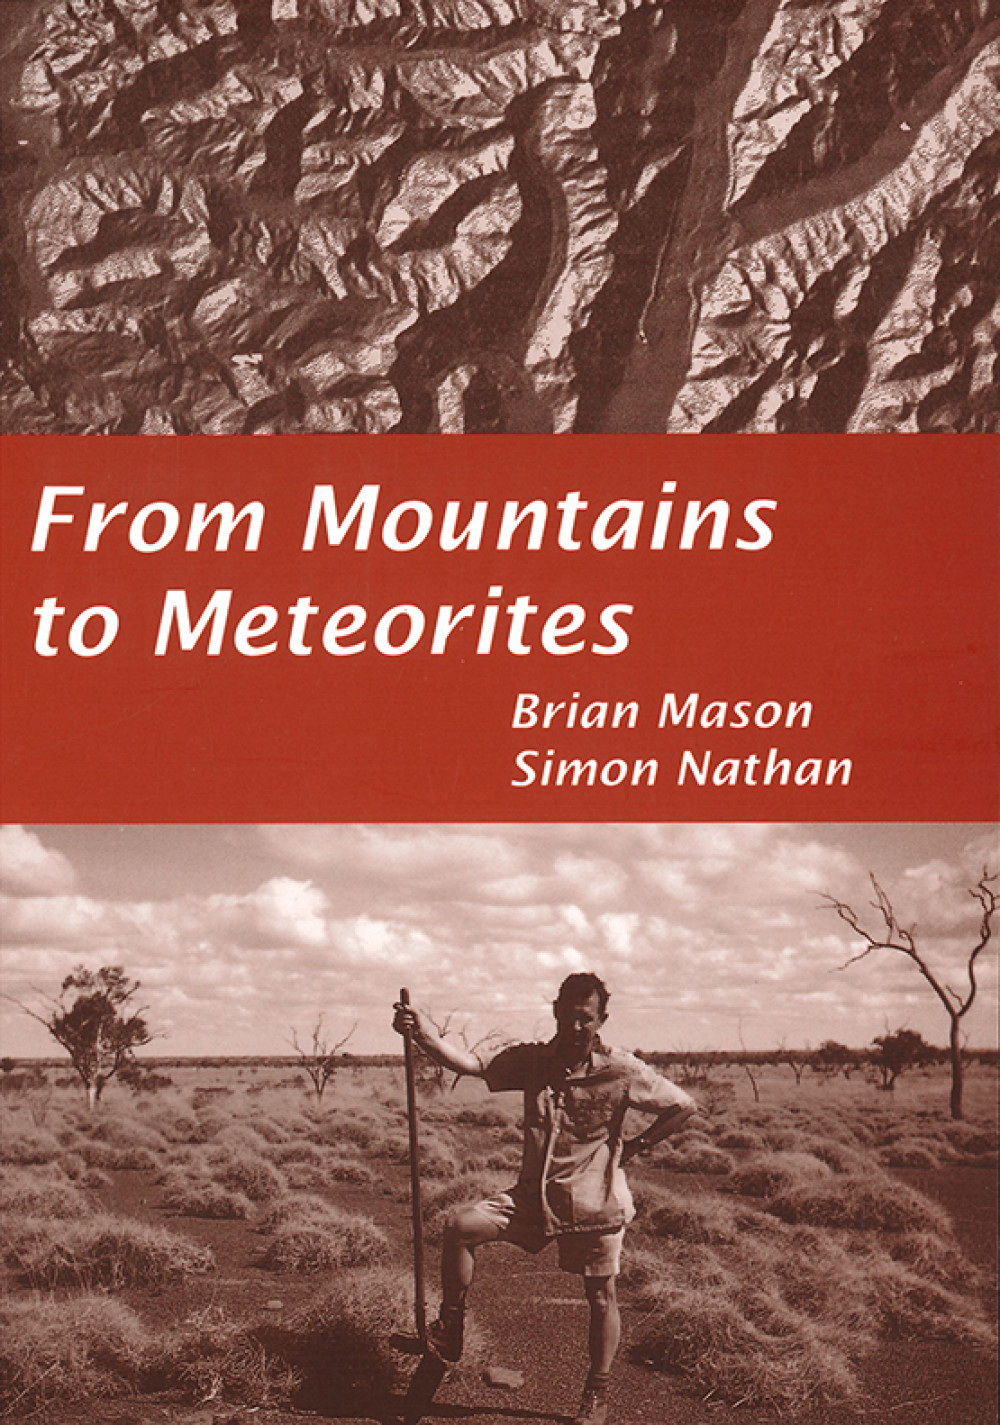 MP109 Mountains Meteorites cover image 96dpi